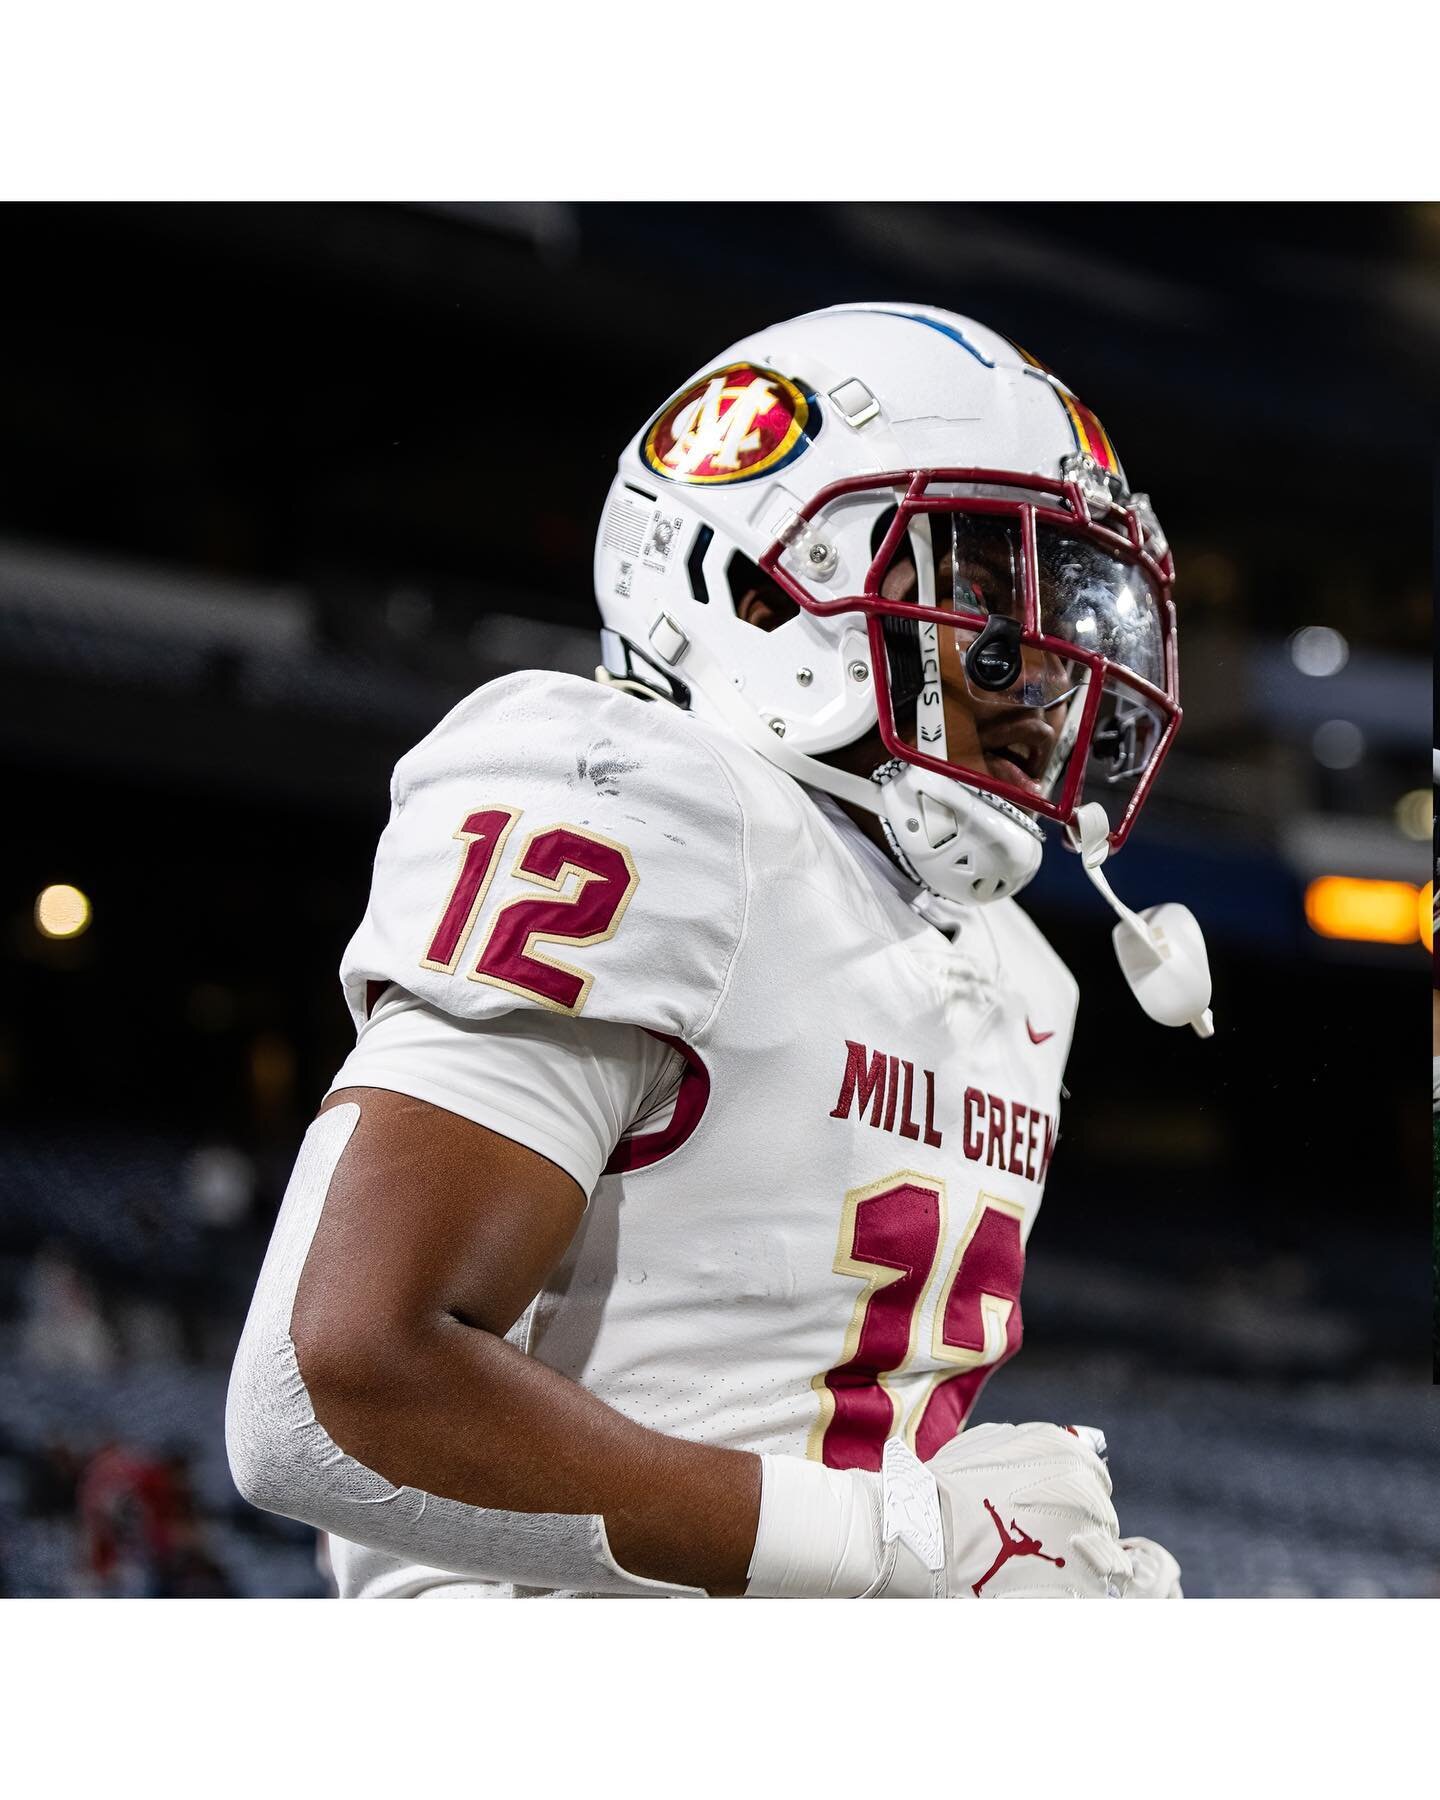 Congratulations to Mill Creek High school football for winning the GHSA Class 7A Football Championship game last night. They won against the Carrollton Trojans with a final score of 70-35